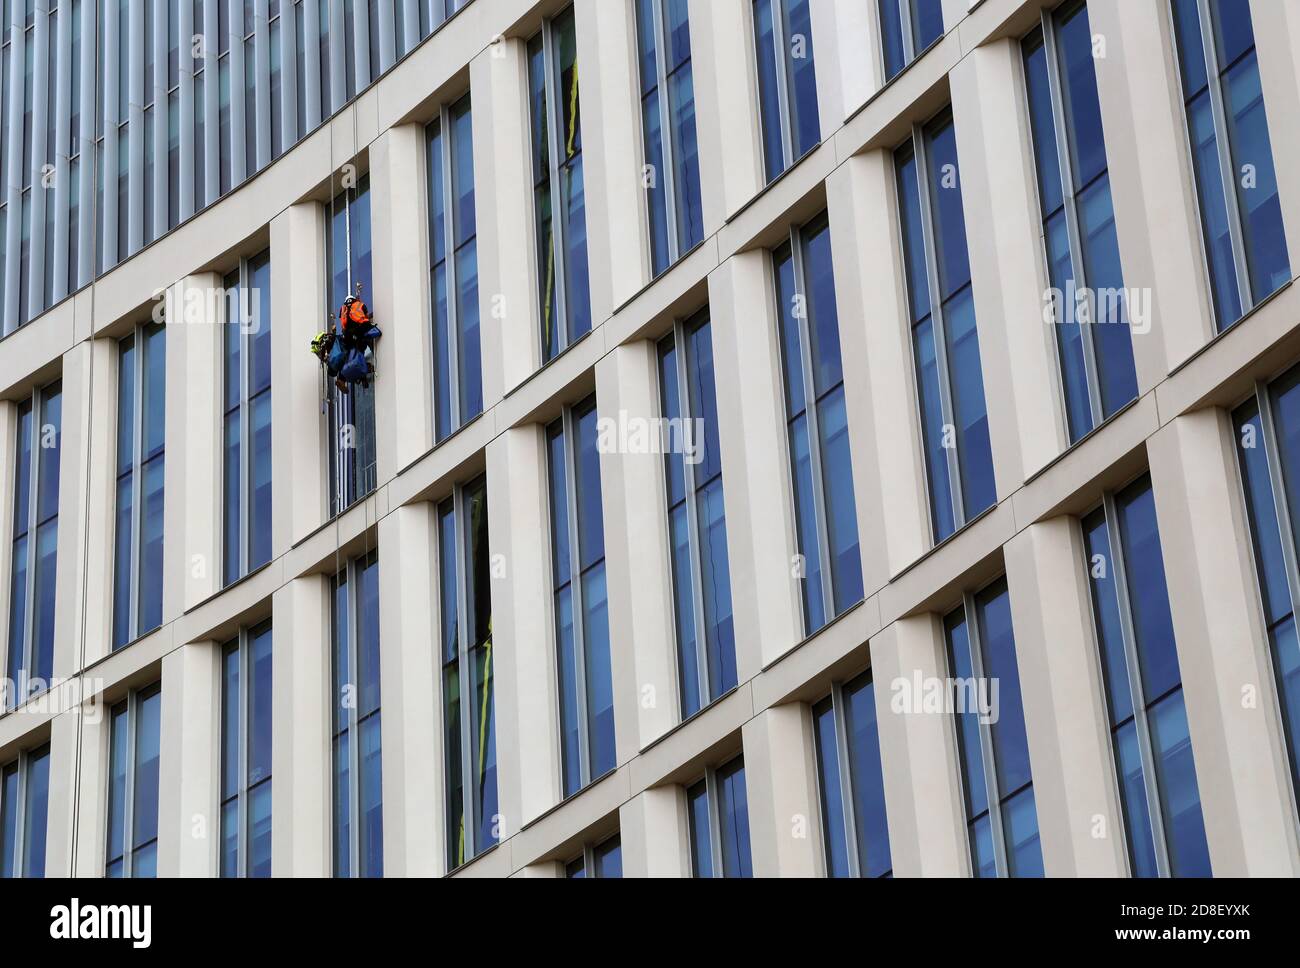 Window washer. Low Angle View of Worker Cleaning Modern Office Building. Manchester, UK. Stock Photo